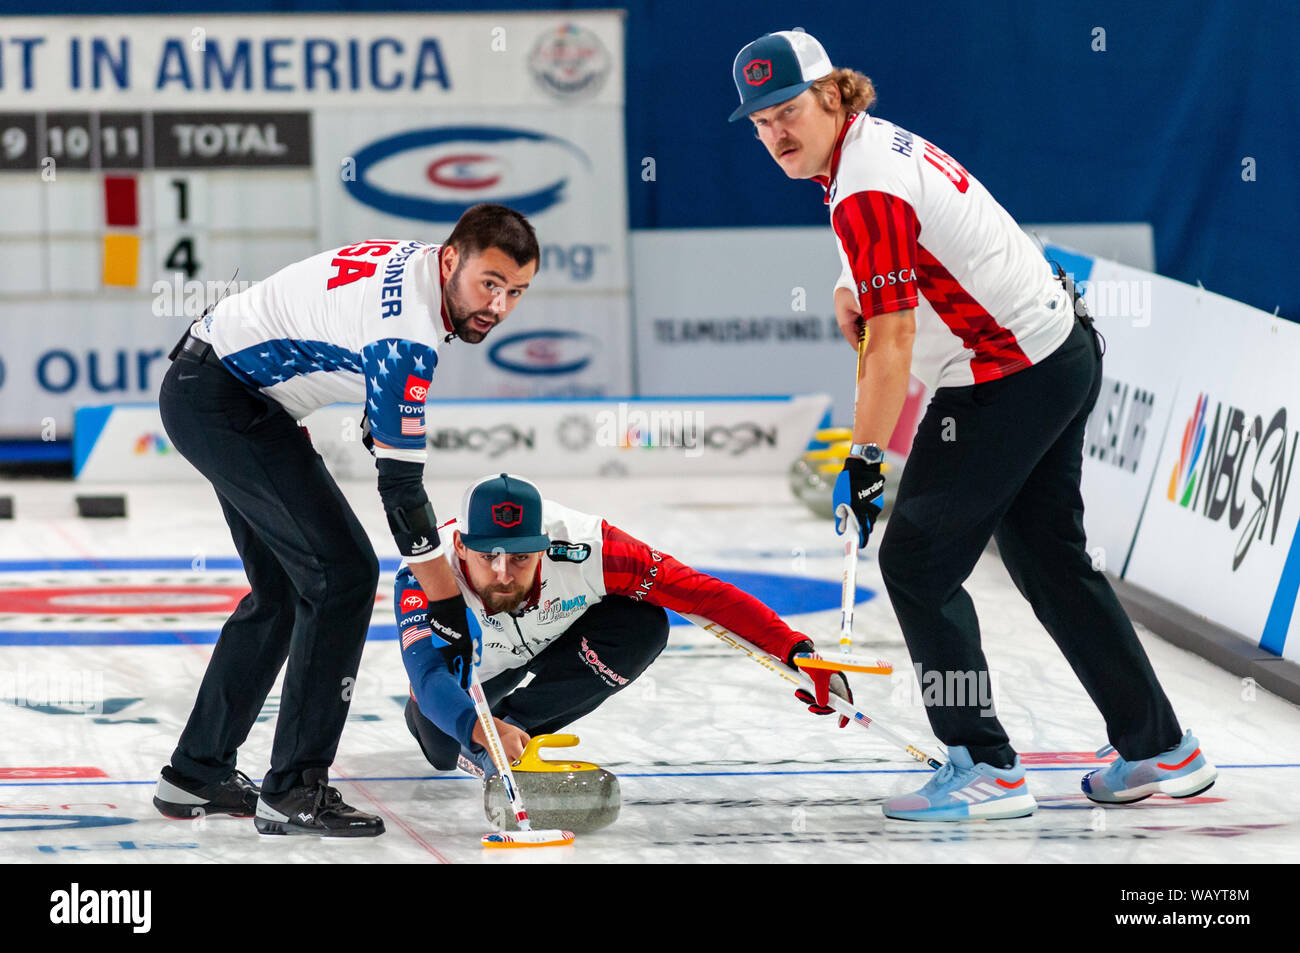 Raleigh, North Carolina, USA. 22nd Aug, 2019. Aug. 22, 2019 Ã RALEIGH, N.C., US - JOHN LANDSTEINER, CHRIS PLYS, and MATT HAMILTON of the United States in action during Curling Night in America at the Raleigh Ice Plex. Curling Night in America featured members of the U.S. Olympic menÃs gold medal team from the 2018 Winter Olympics in South Korea U.S. womenÃs team, as well as teams from Italy, Japan, and Scotland, Aug. 22-24, 2019. Credit: Timothy L. Hale/ZUMA Wire/Alamy Live News Stock Photo